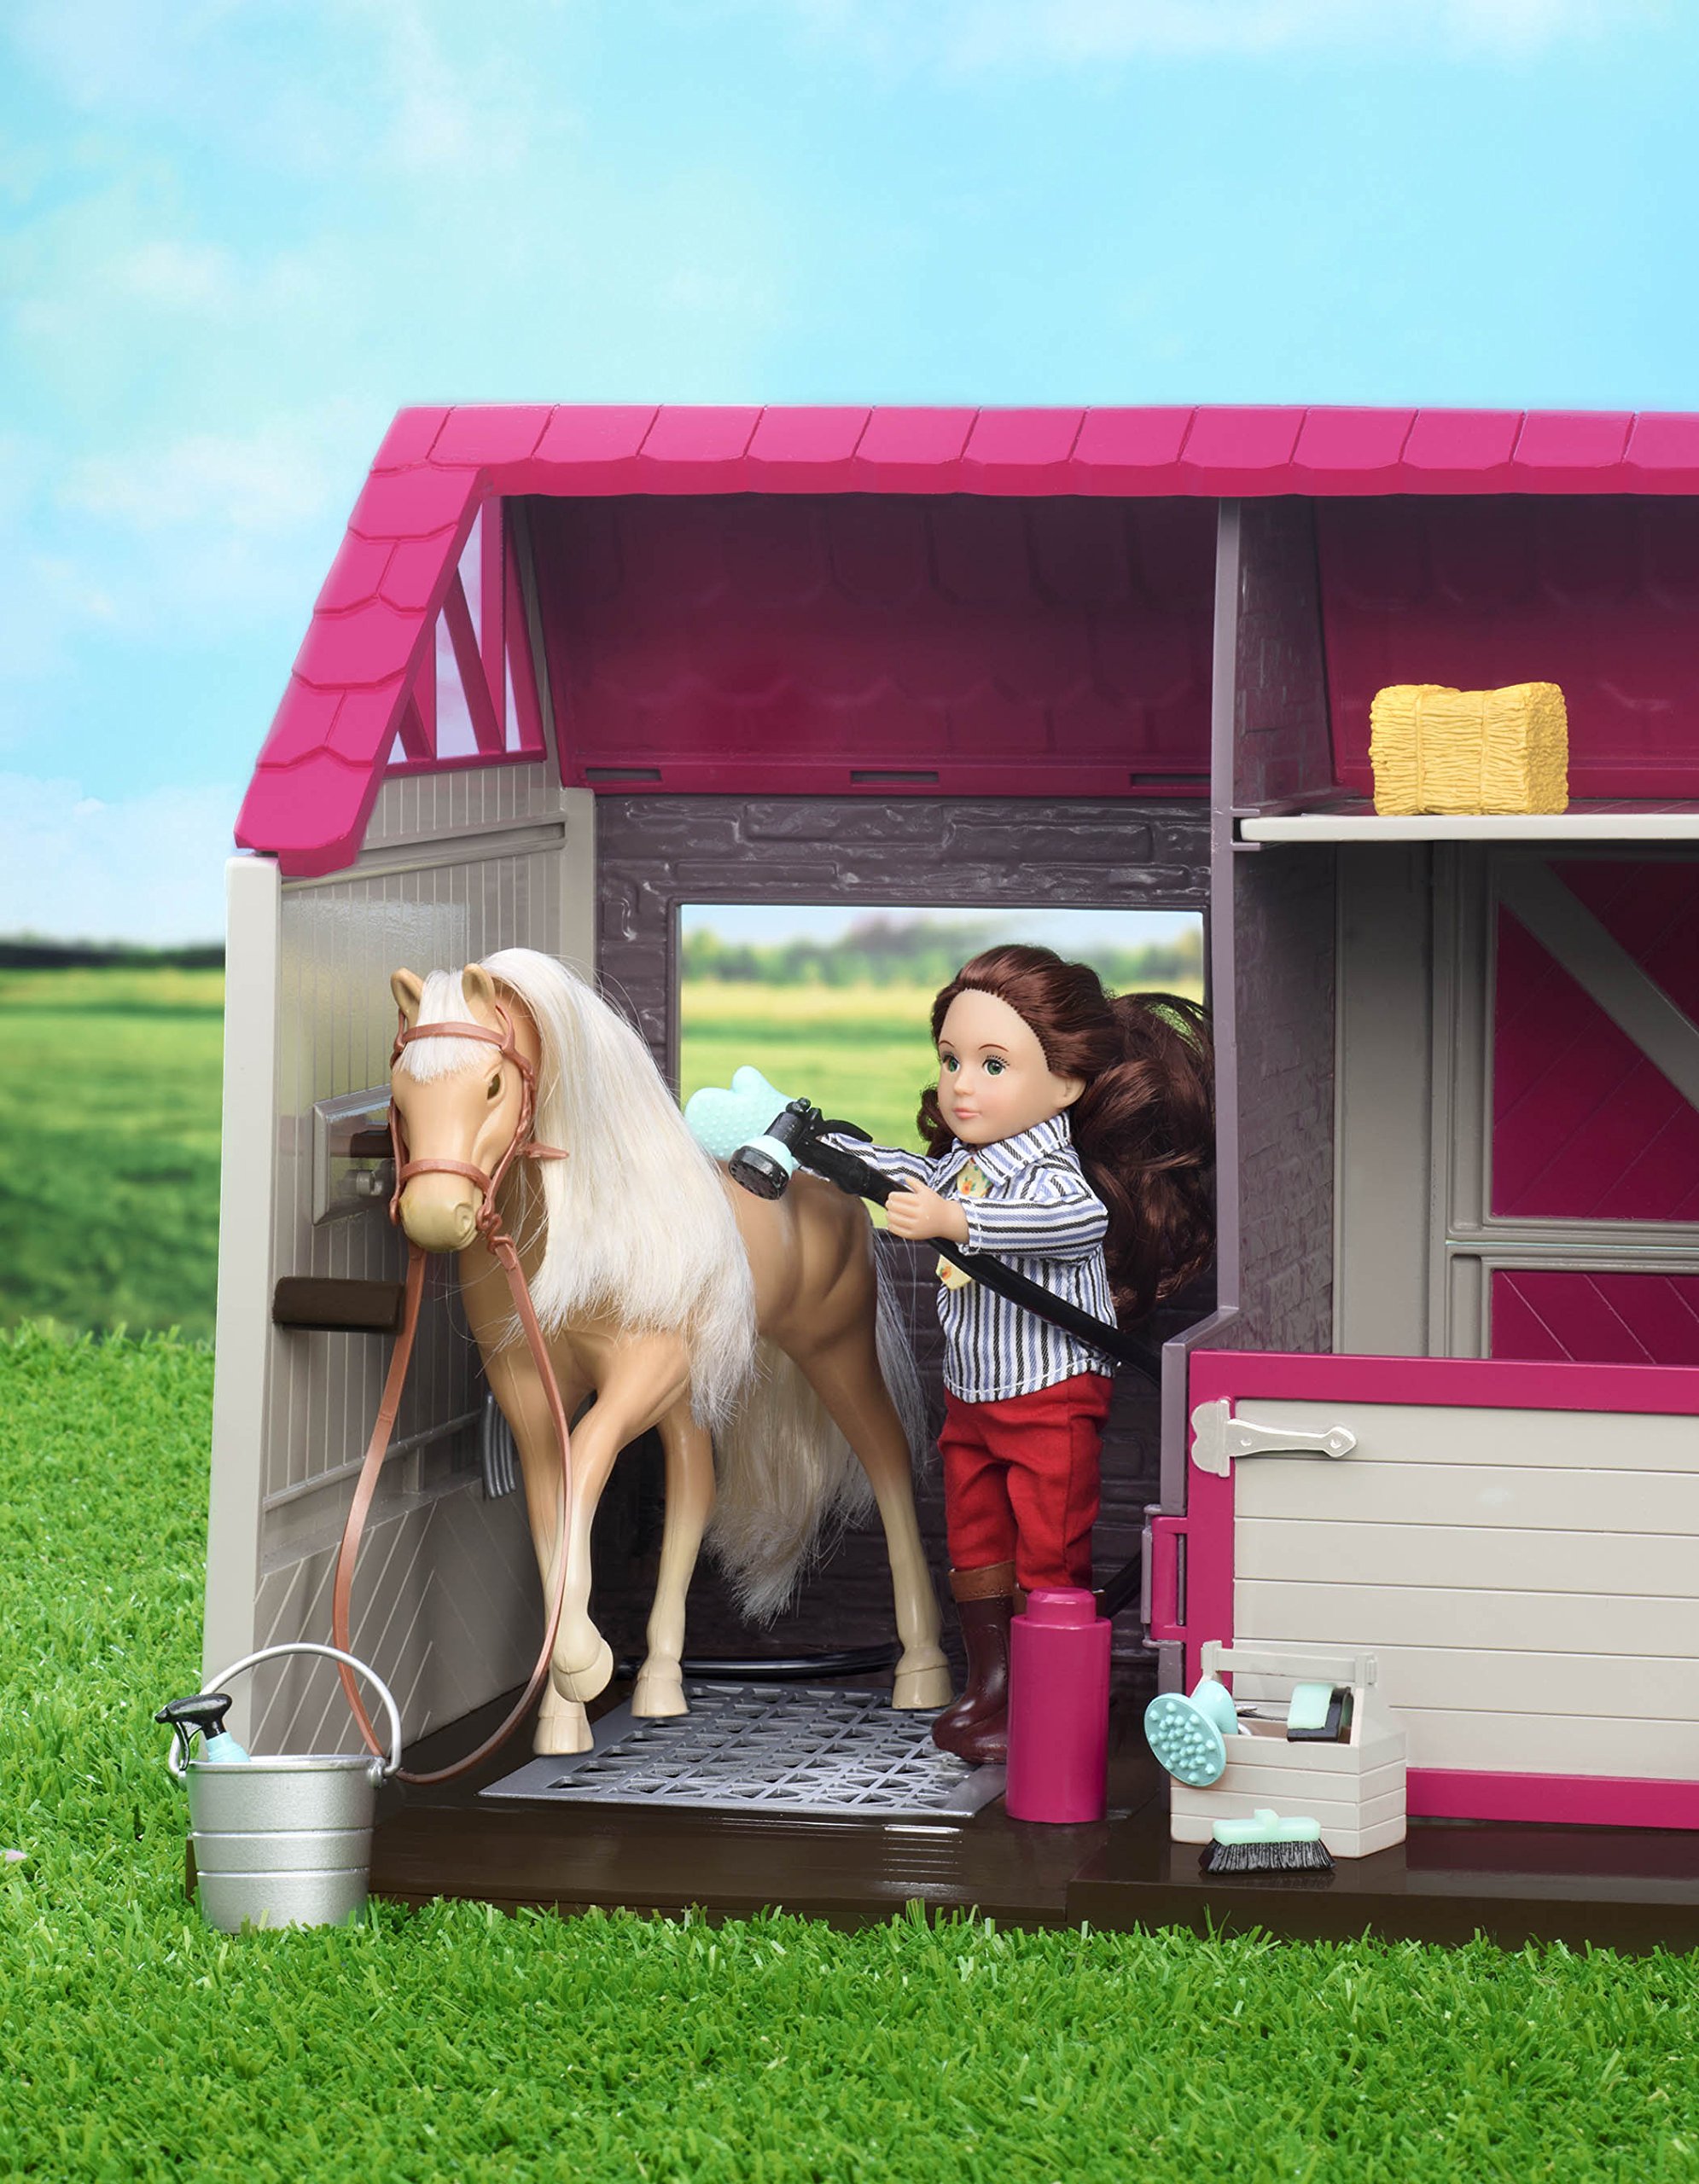 Lori Dolls – Horse Haven – Toy Stable – Playset for 6-inch Horses & Mini Dolls – Horse Barn & Accessories – Working Lights & Real Wash Stall – 3 Years +